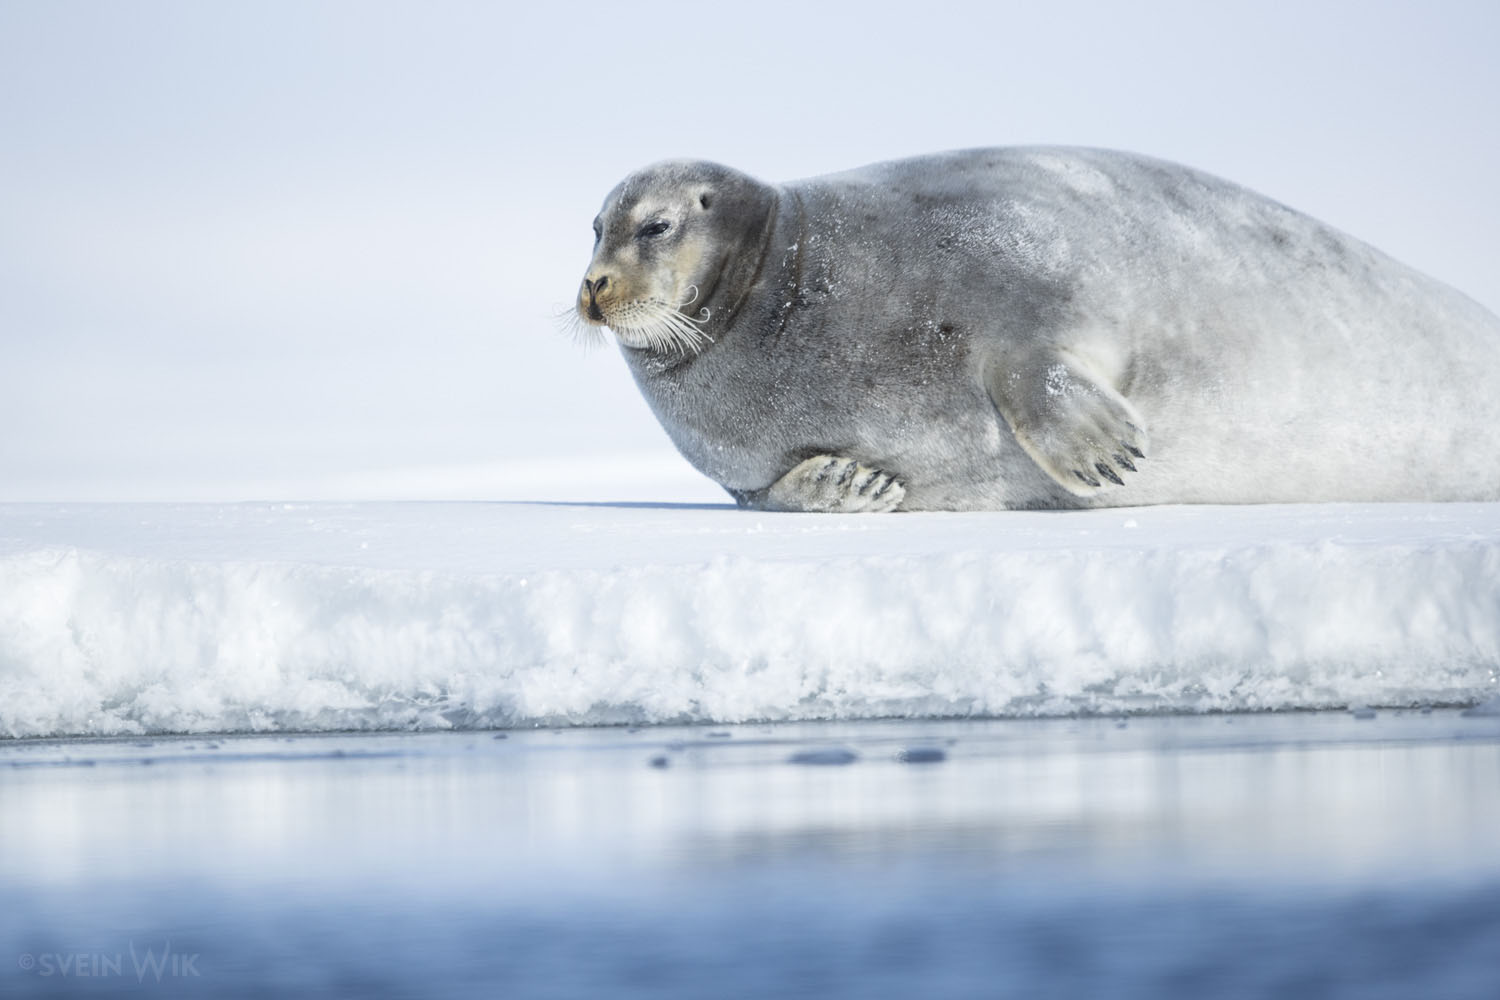 Bearded Seal posing on the ice. We had several very good situations for this